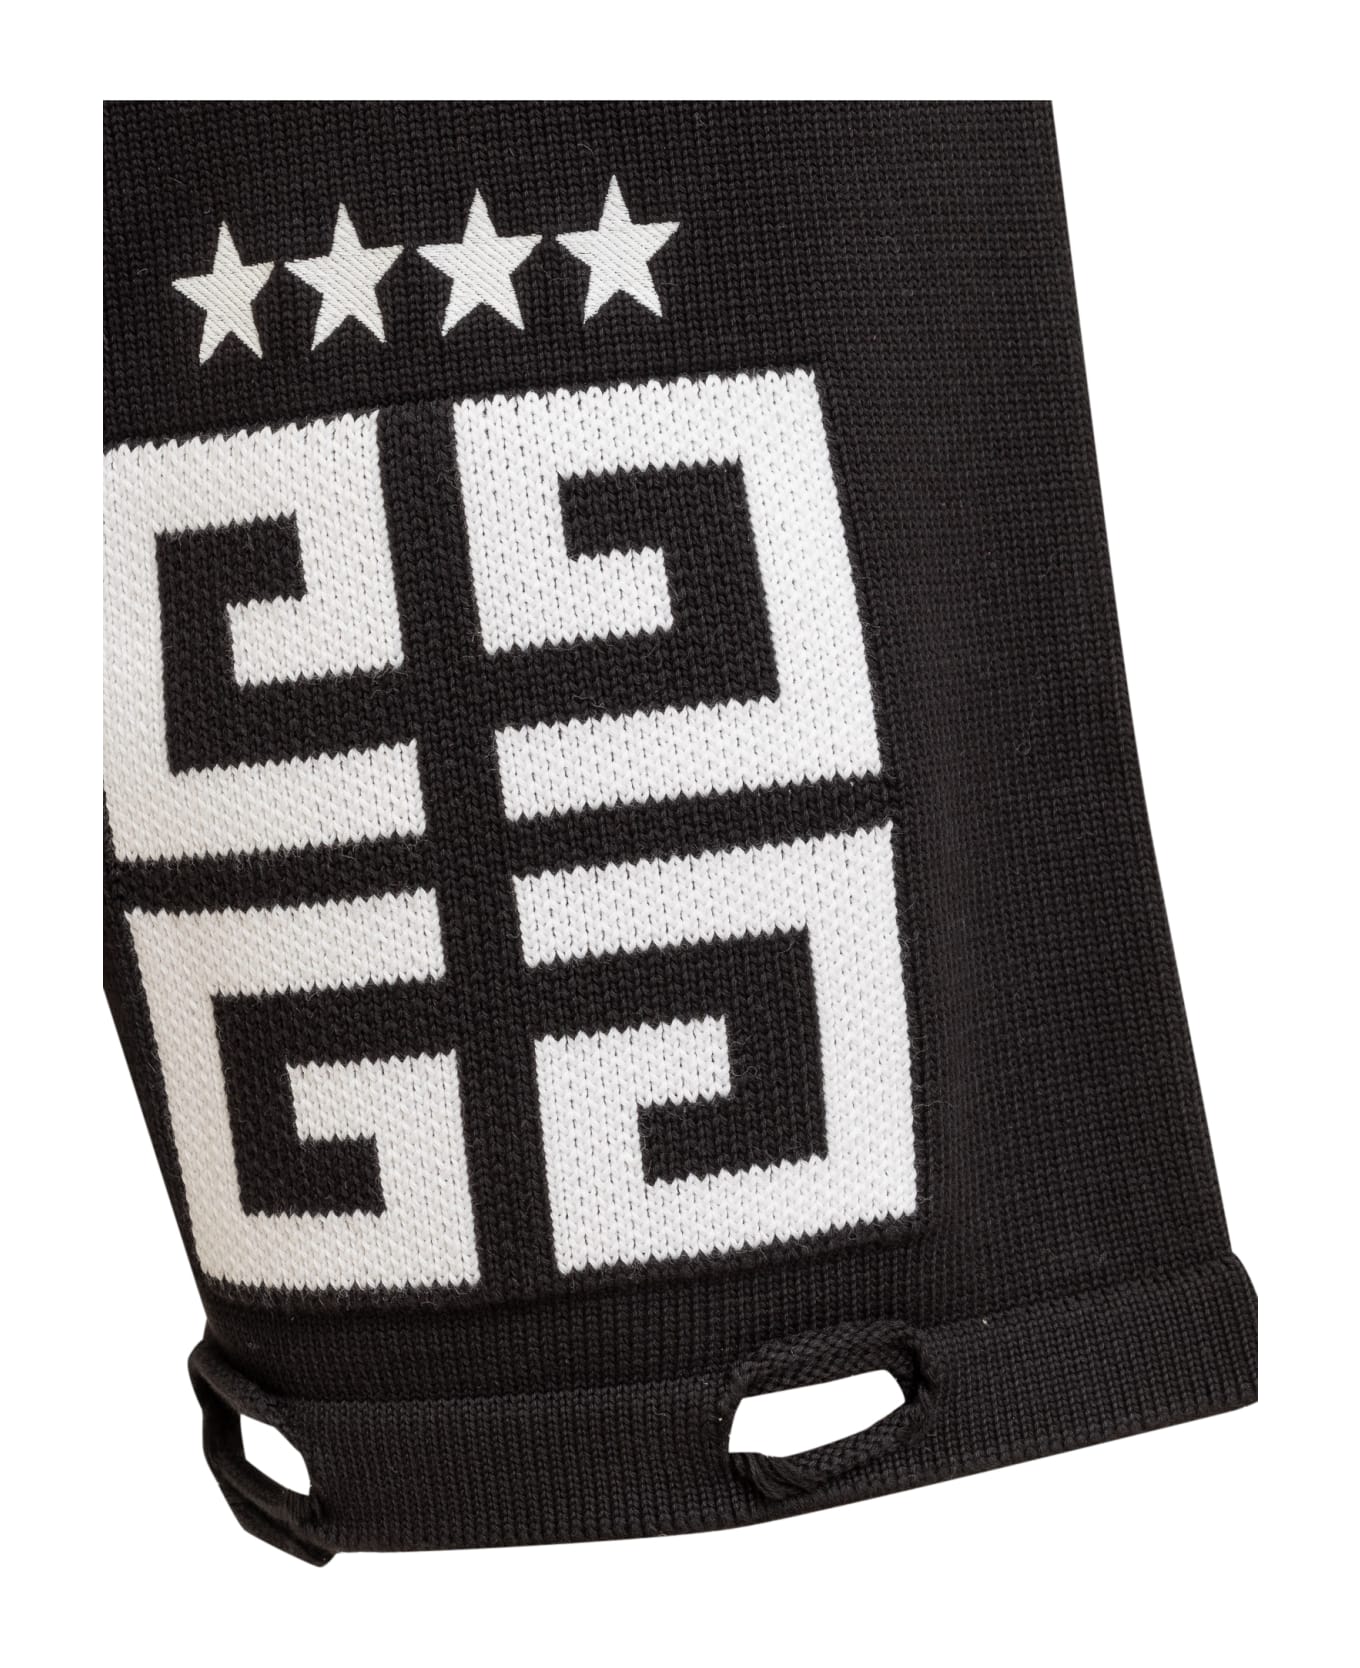 Givenchy Embroidered Knit Shorts - BLACK/WHITE ショートパンツ